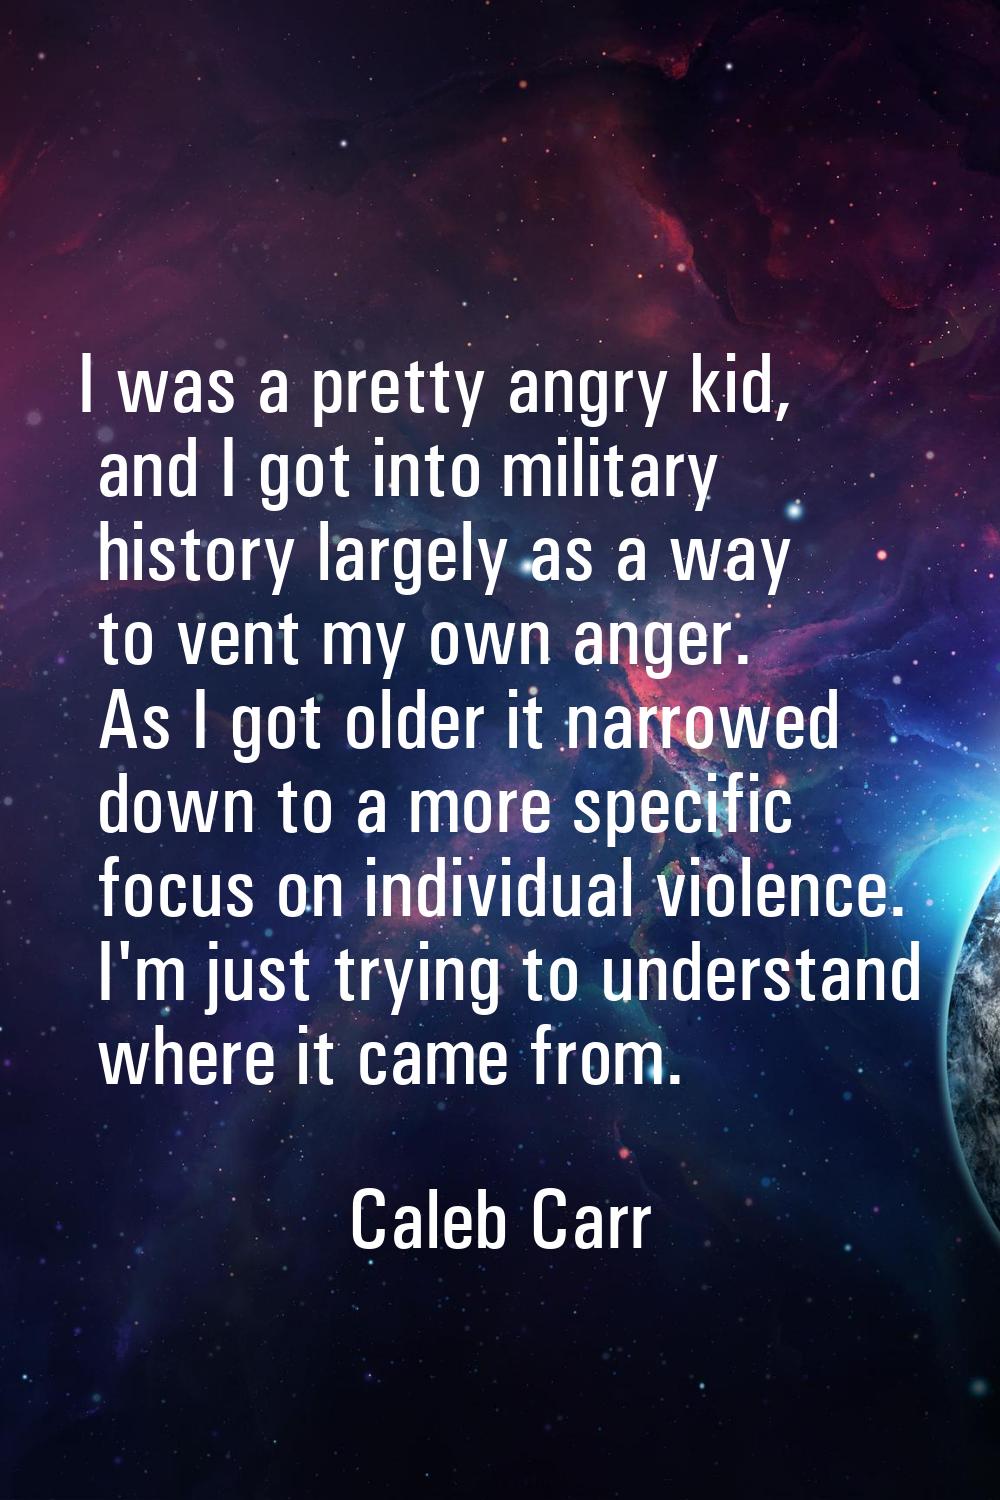 I was a pretty angry kid, and I got into military history largely as a way to vent my own anger. As